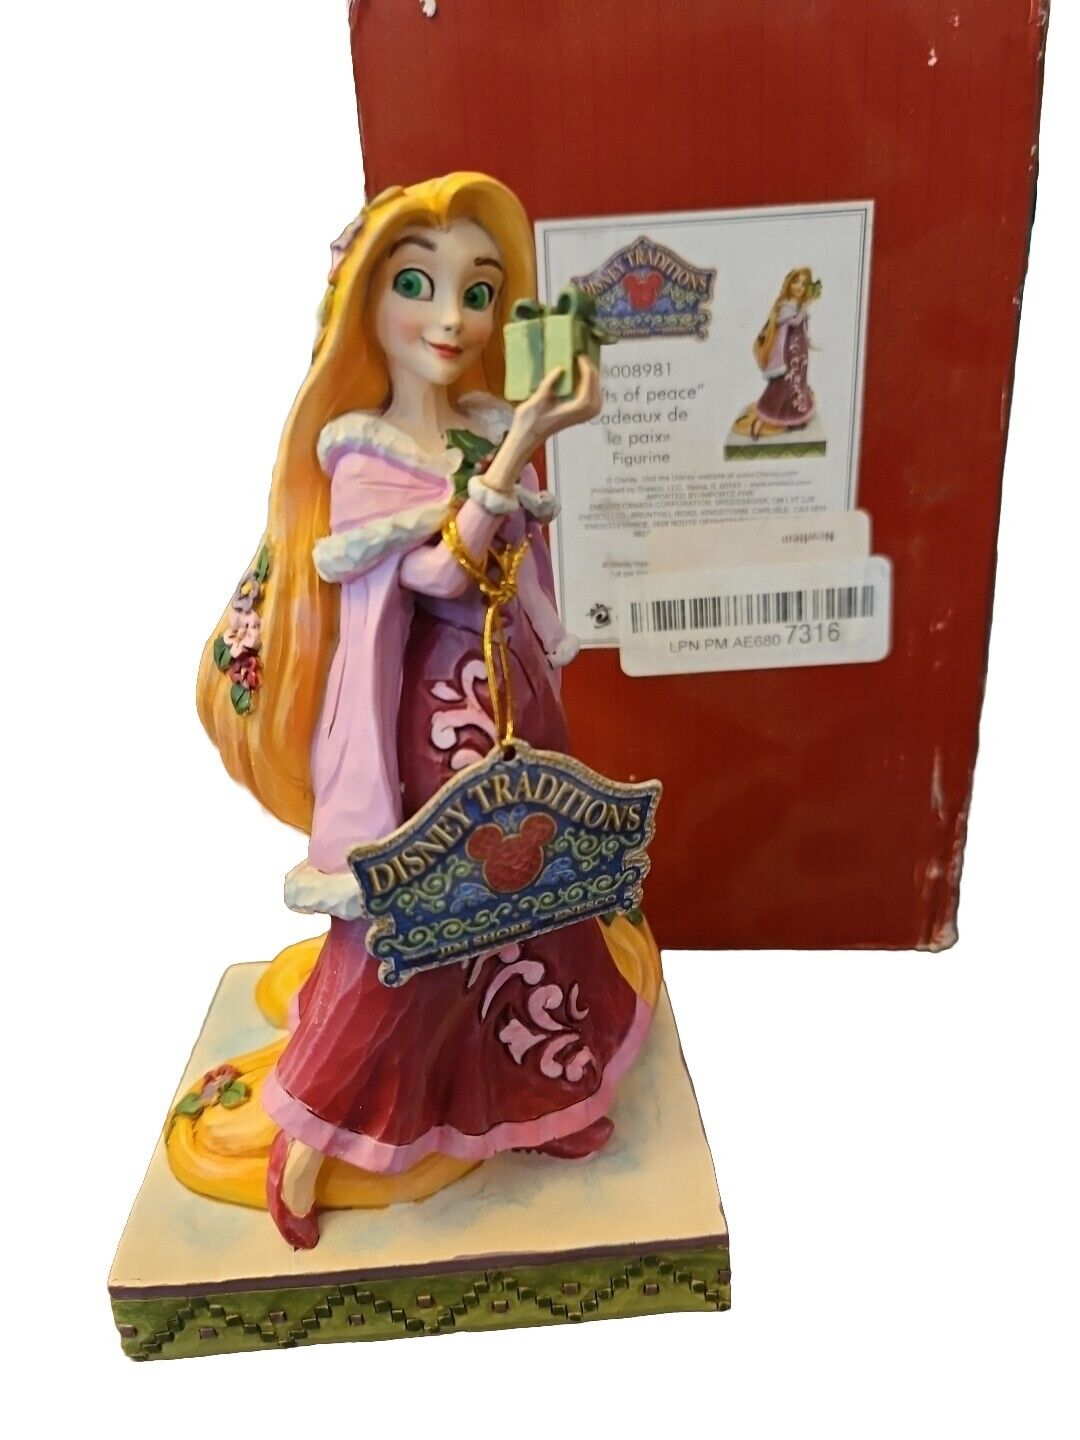 Disney Traditions Rapunzel Gifts Of Peace Christmas Figure 6008981 Tangled Read